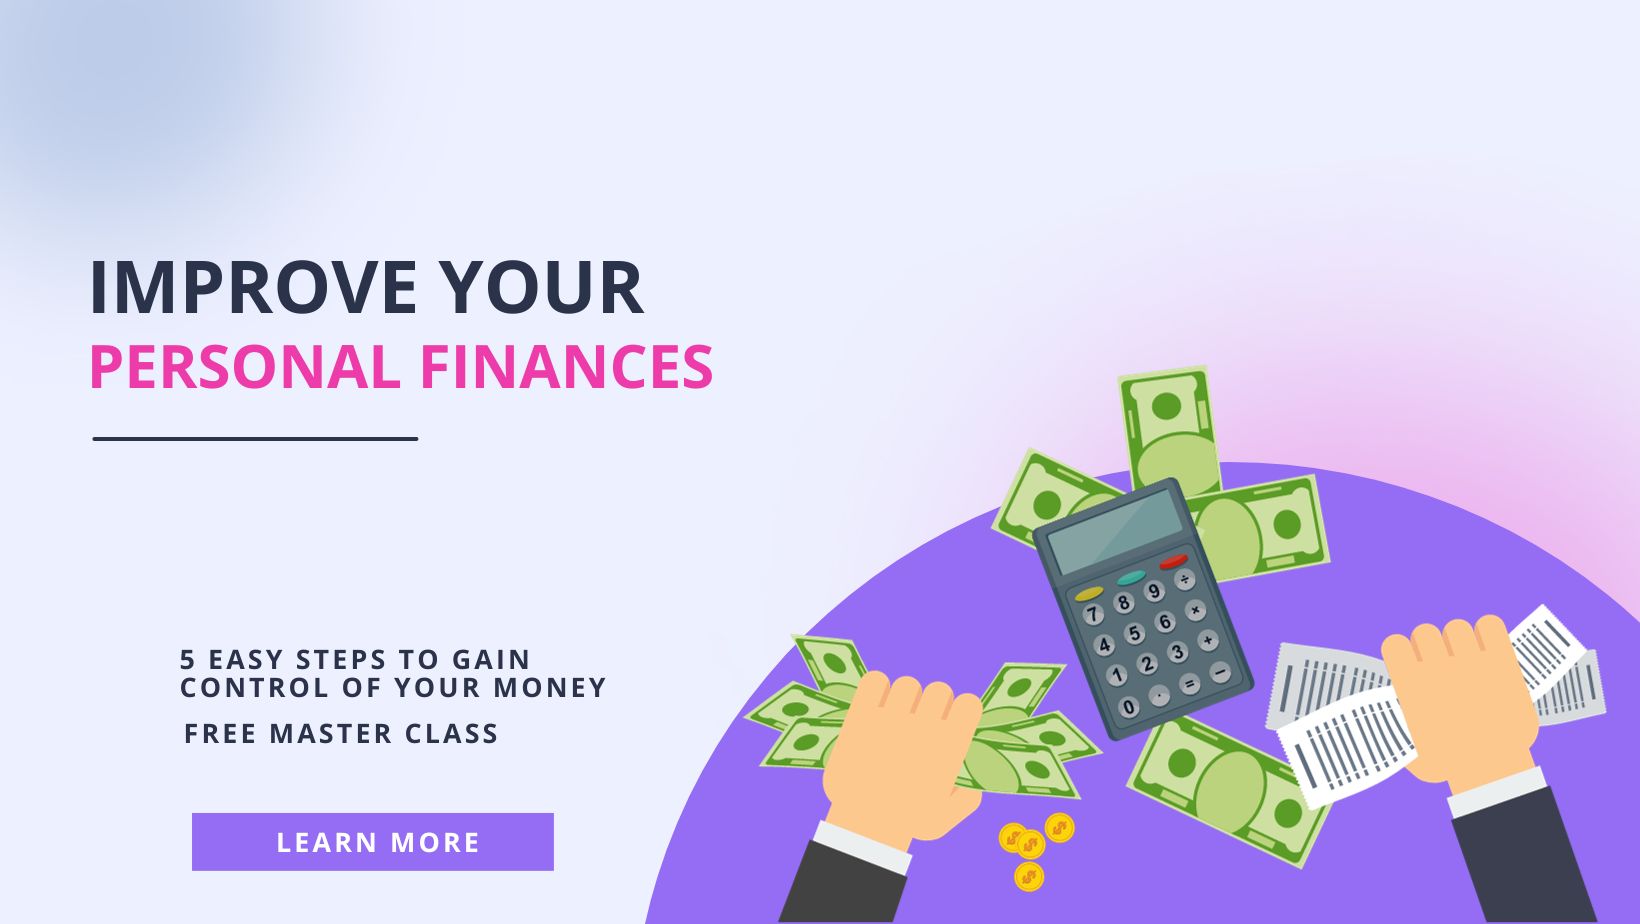 Improve Your Personal Finances 5 Easy Steps to Gain Control of Your Money